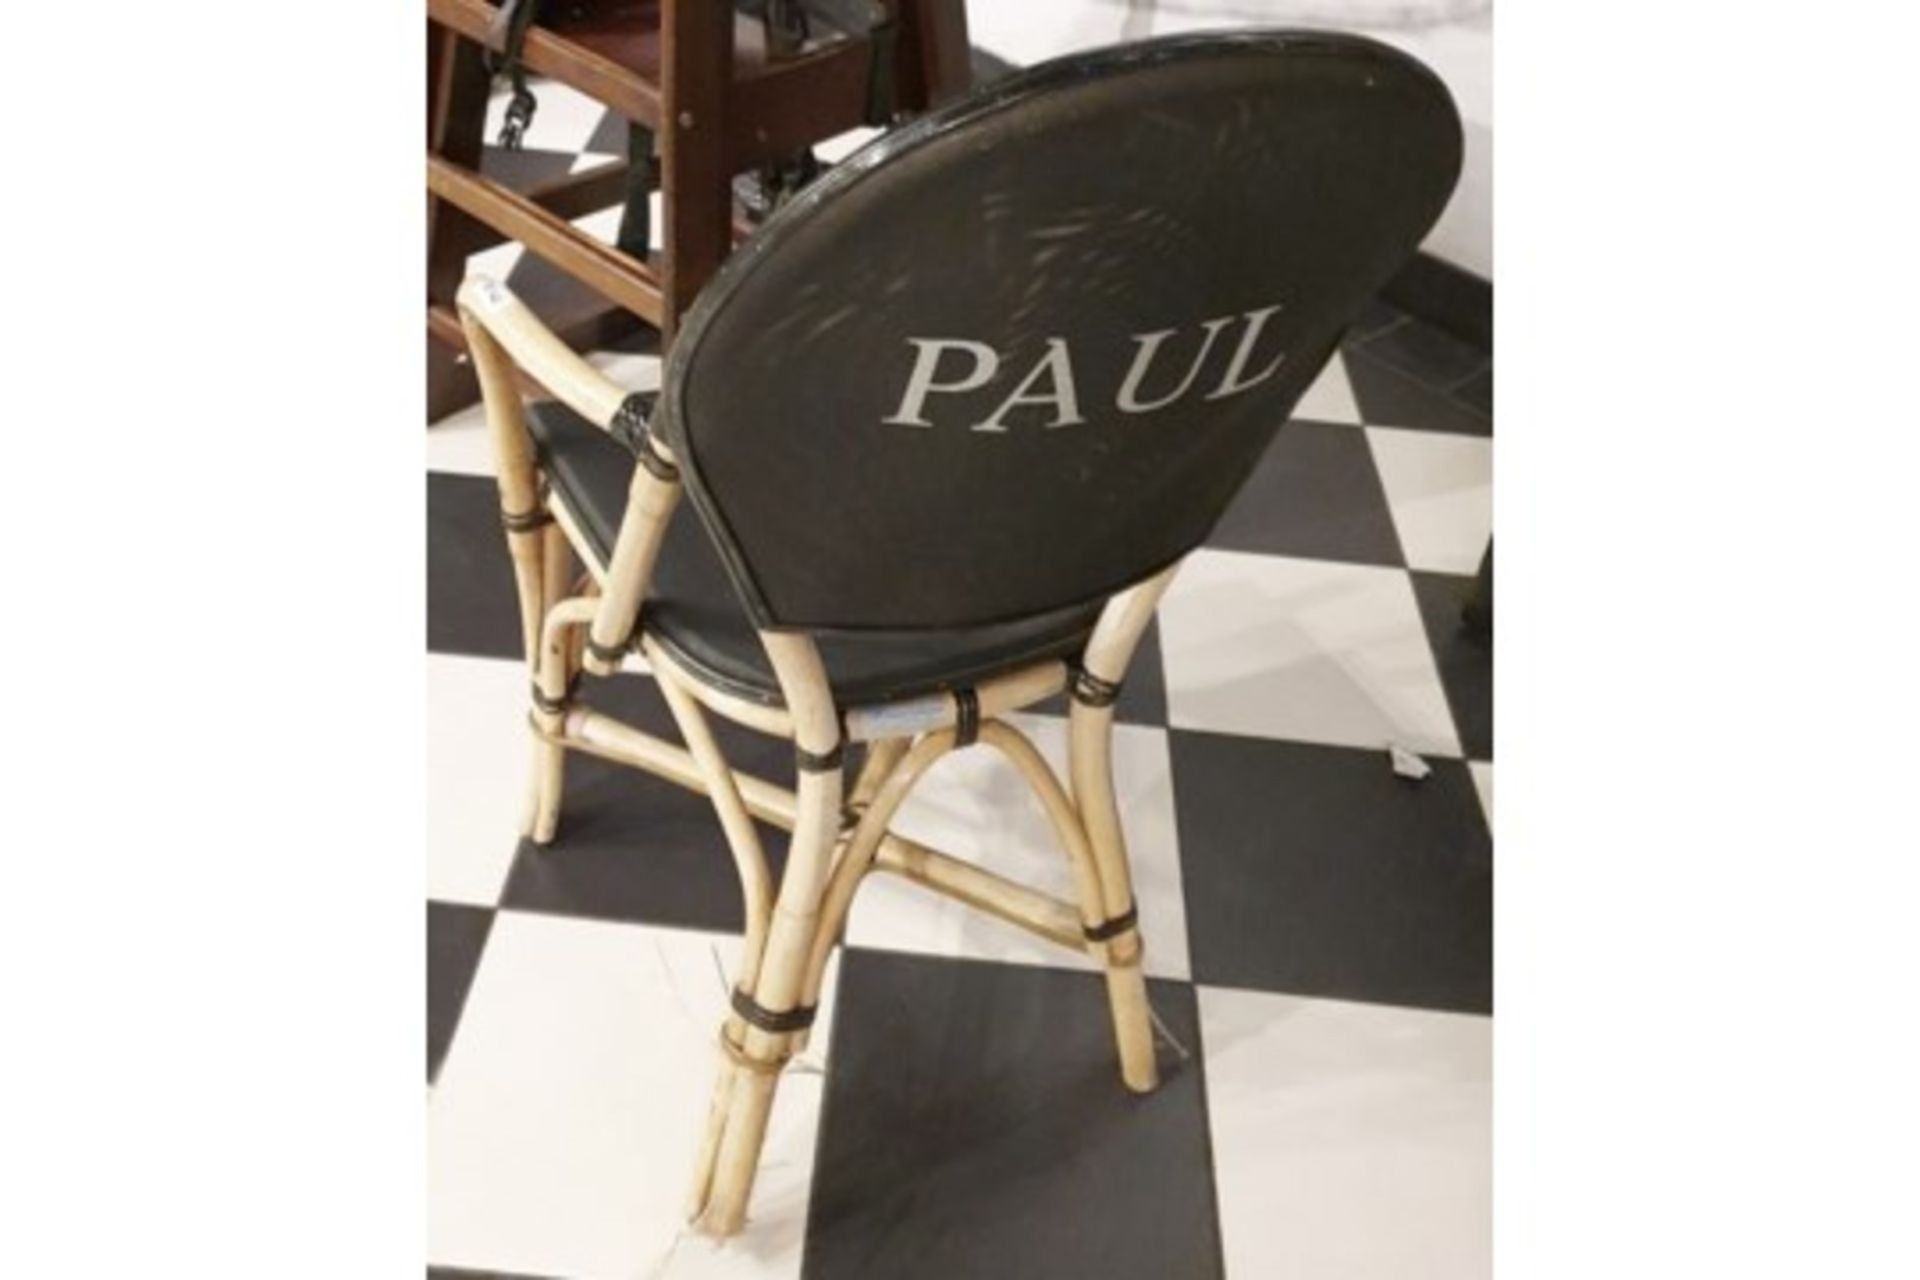 1 x Bamboo Studio Chair With Black Seat and Back Rest - Features the Name 'PAUL' Printed on the Back - Image 3 of 3